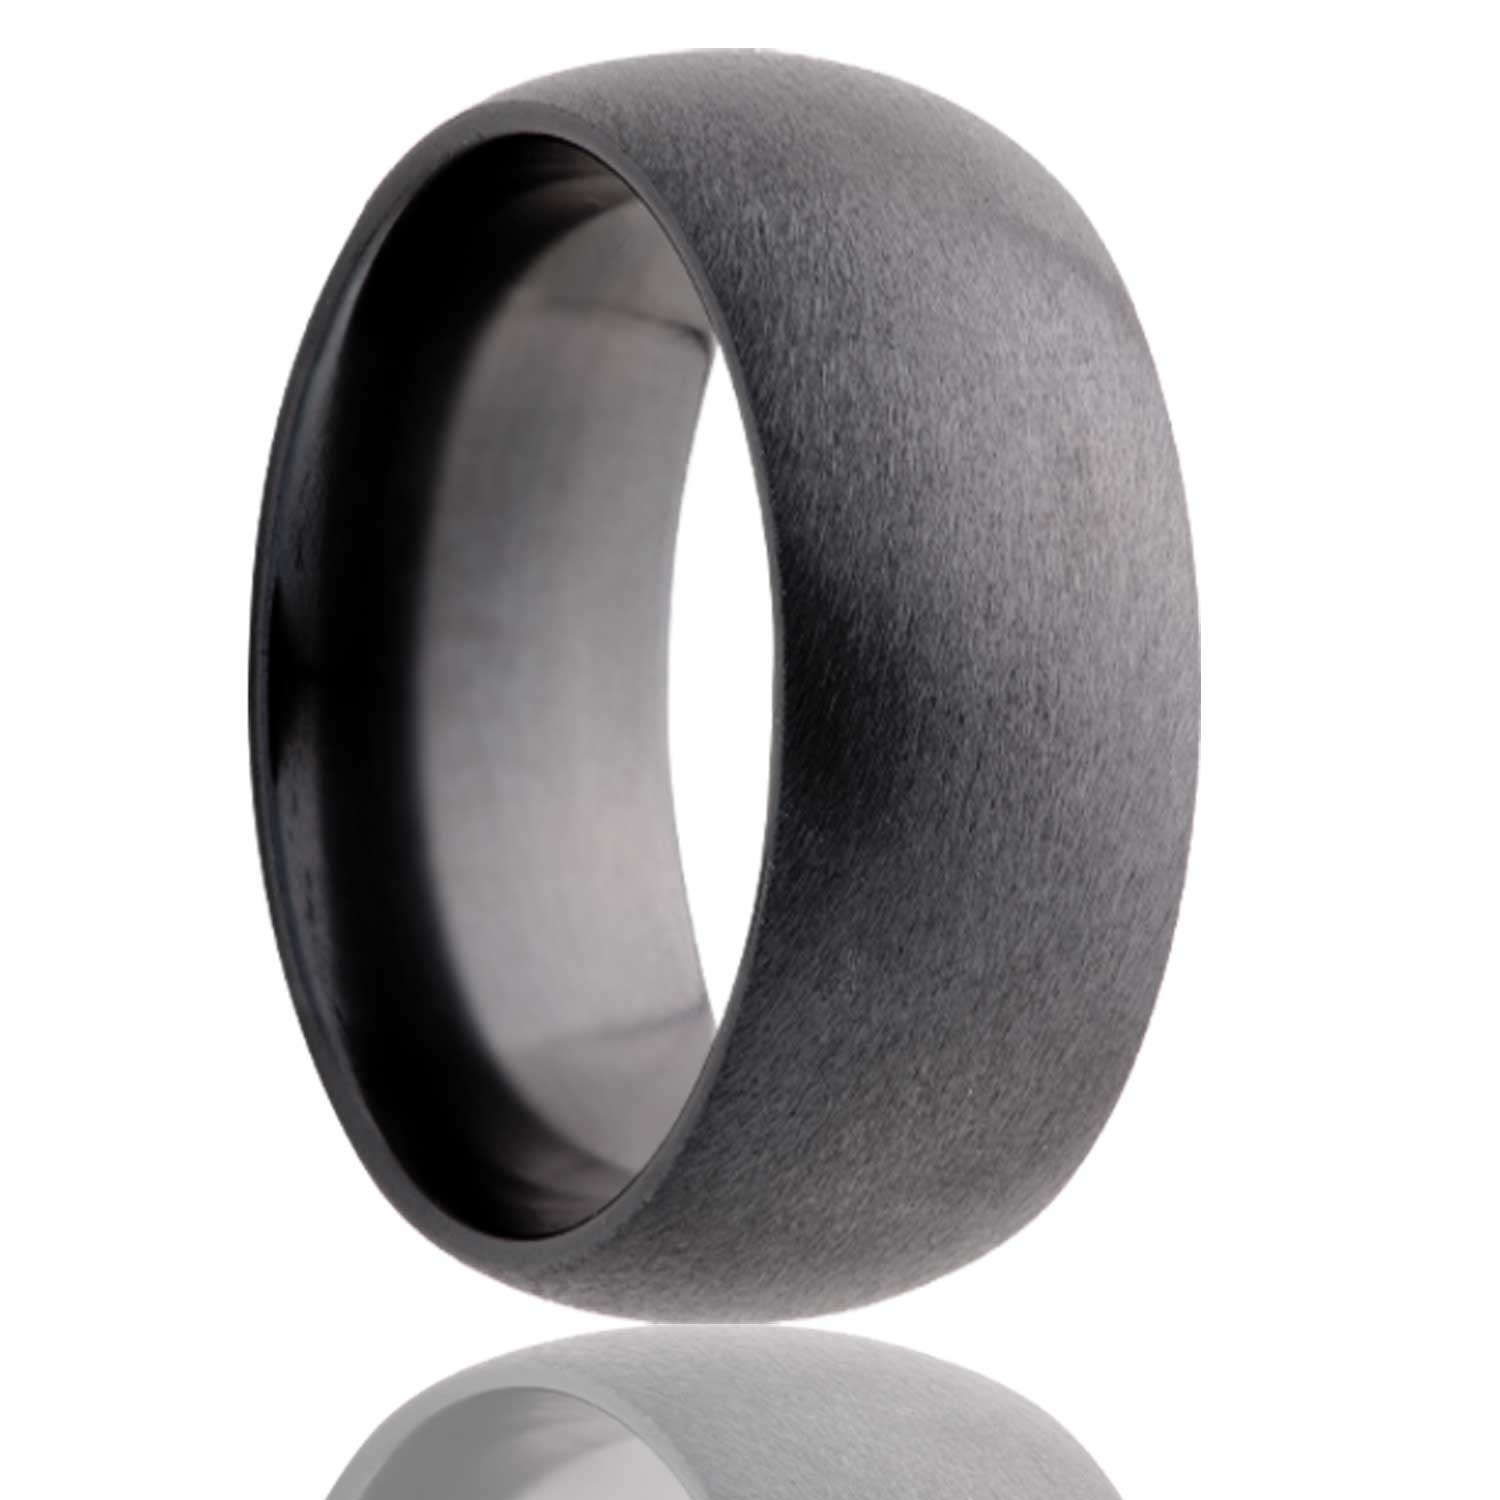 A domed satin finish wedding band displayed on a neutral white background.